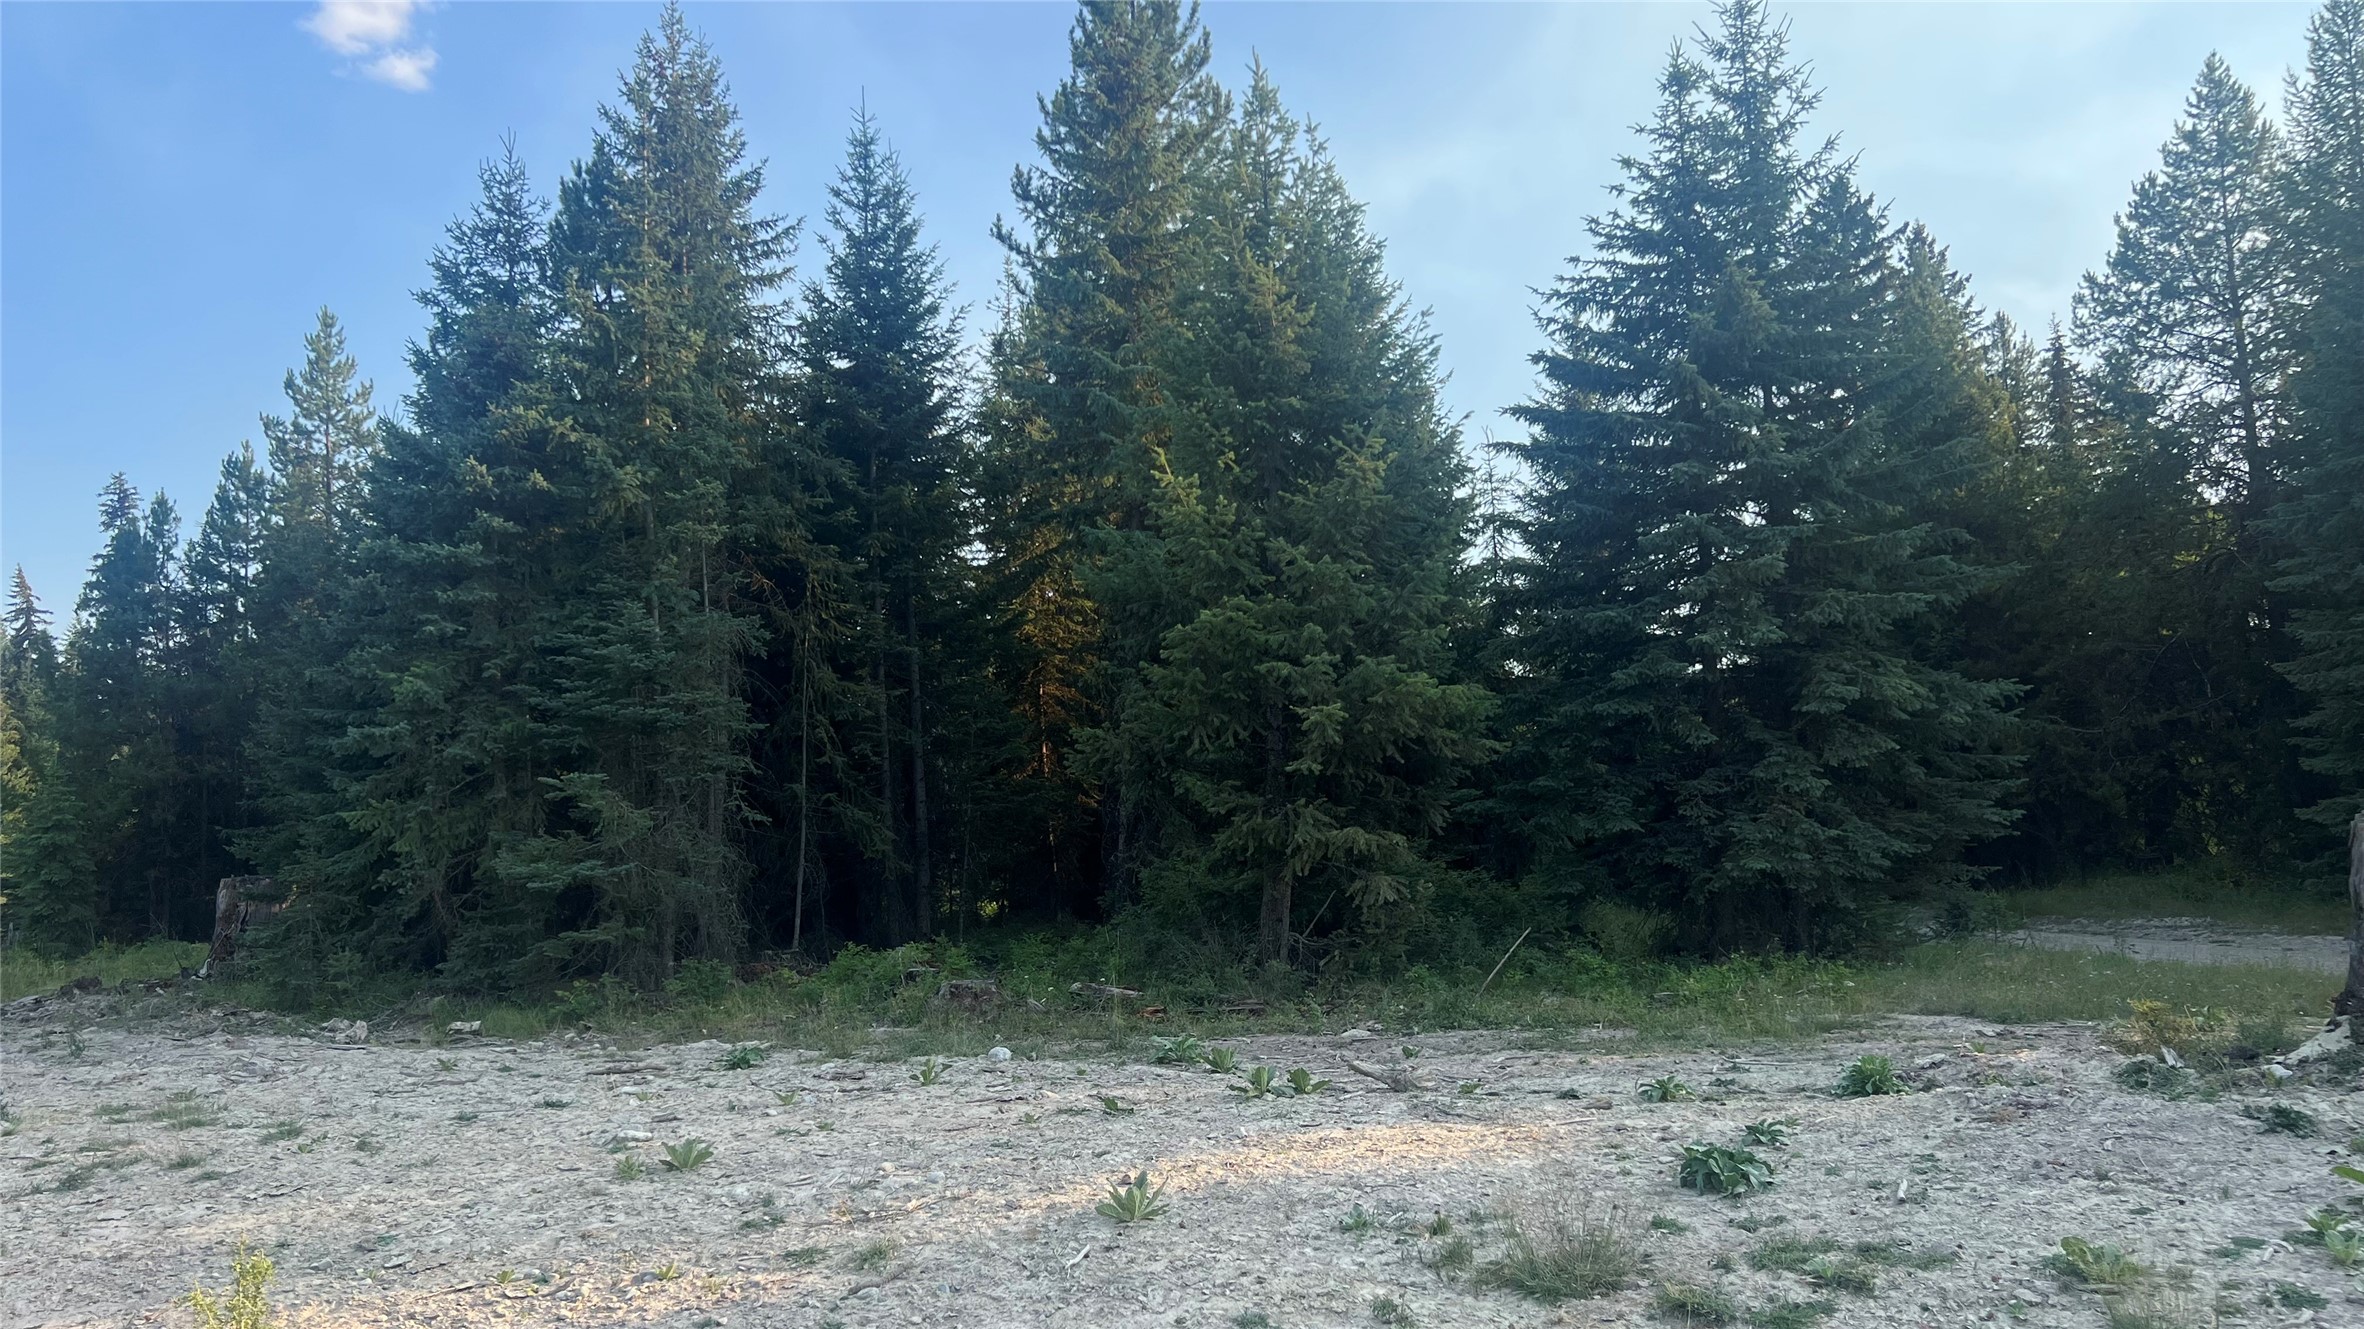 This 20.20 acre lot is located within close proximity to Happy's Inn and halfway between Libby and Kalispell MT. Whether your building your dream home or starting a small homestead this property will meet your needs and has endless potential. Within a short proximity are the Thompson Chain of lakes, lakes, streams and rivers. The year long recreational opportunities in the area are countless. Phone and power are installed. Take a drive and visit your future homesite. Call Roby Bowe at 406-293-1988 or your Real Estate Professional.